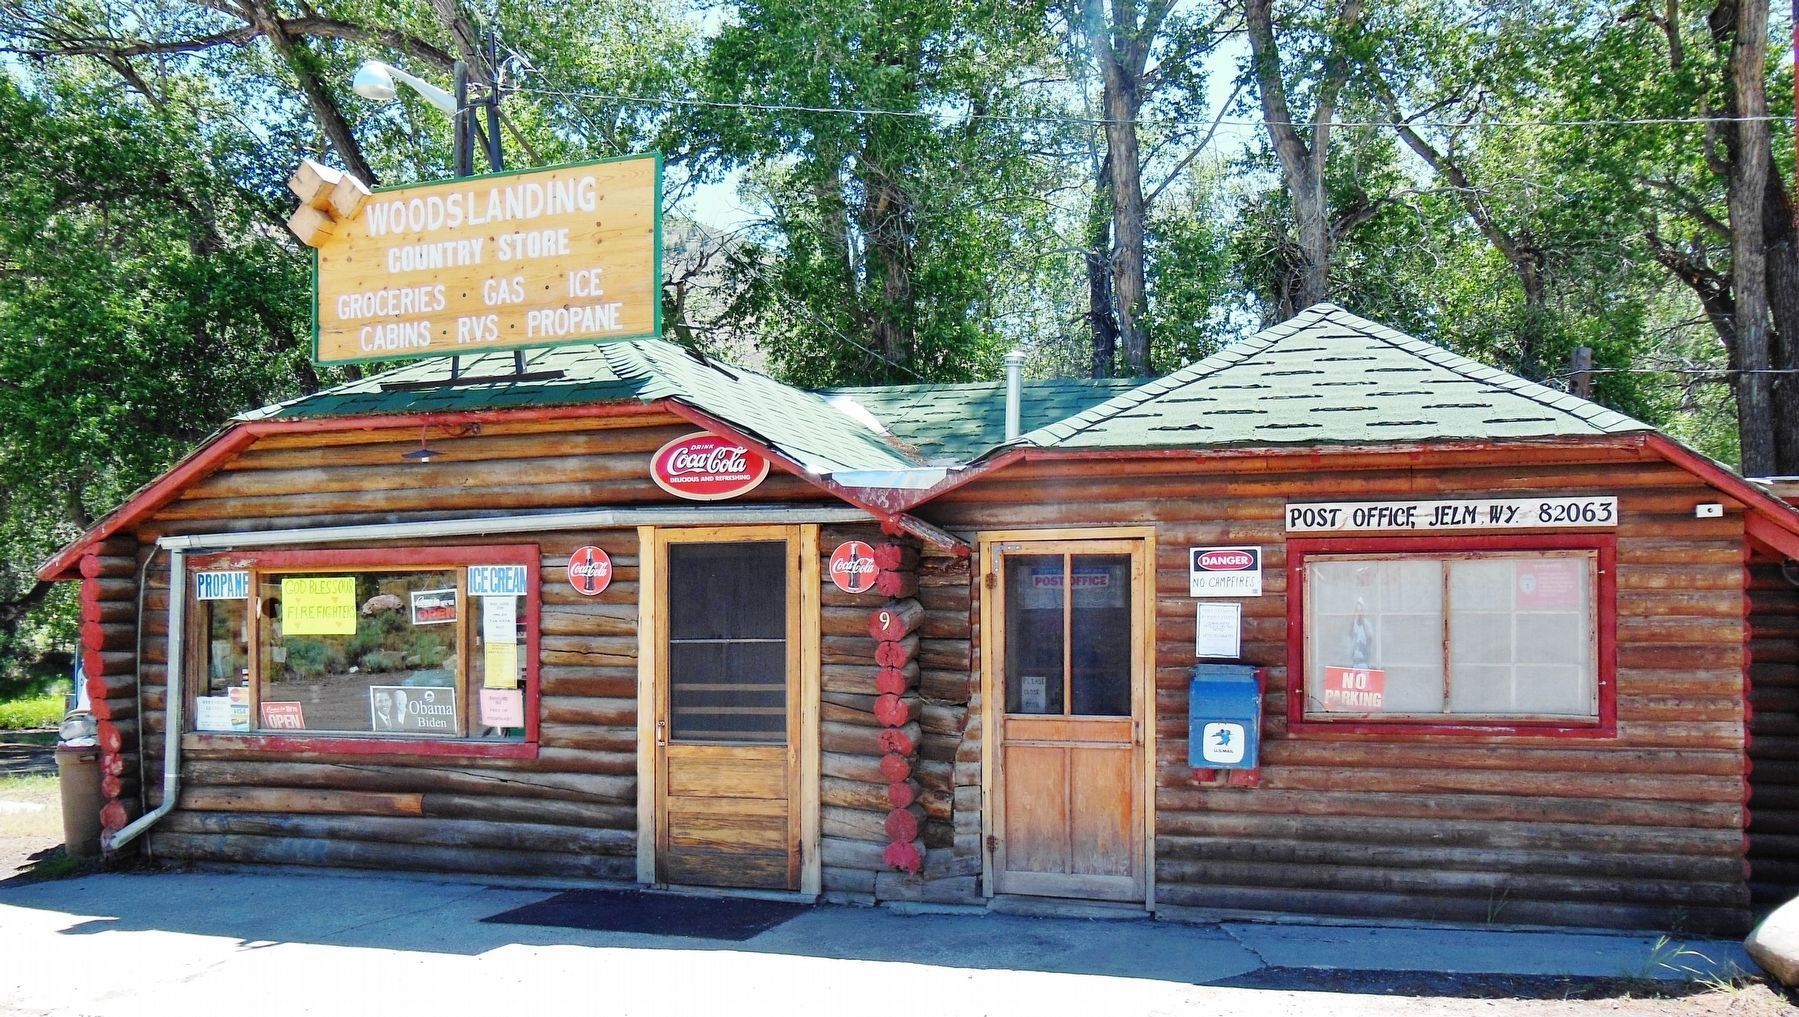 Woods Landing Country Store image. Click for full size.